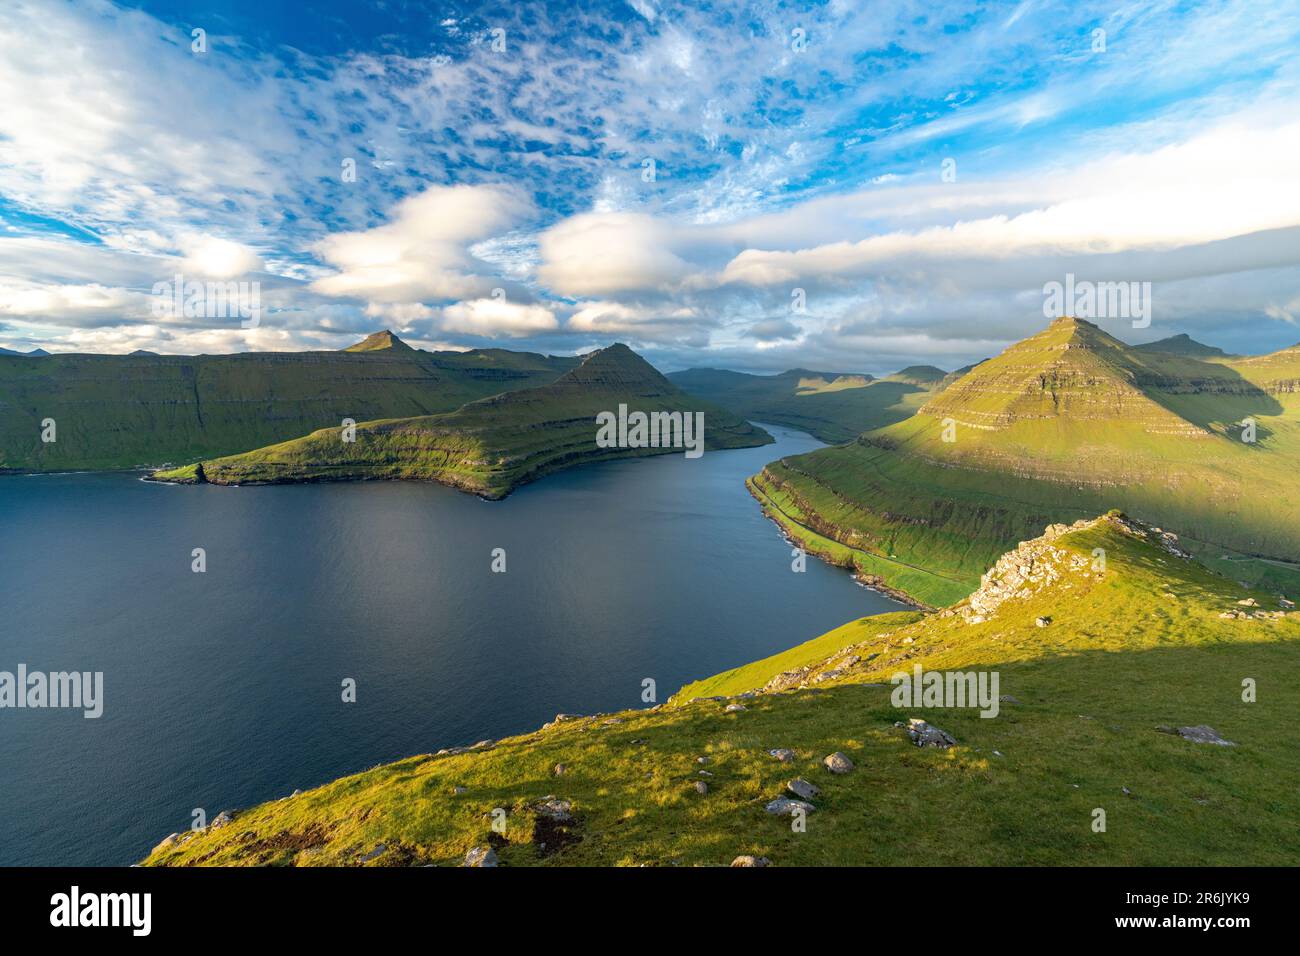 Clouds in the summer sky over mountains along a fjord, Eysturoy Island, Faroe Islands, Denmark, Europe Stock Photo